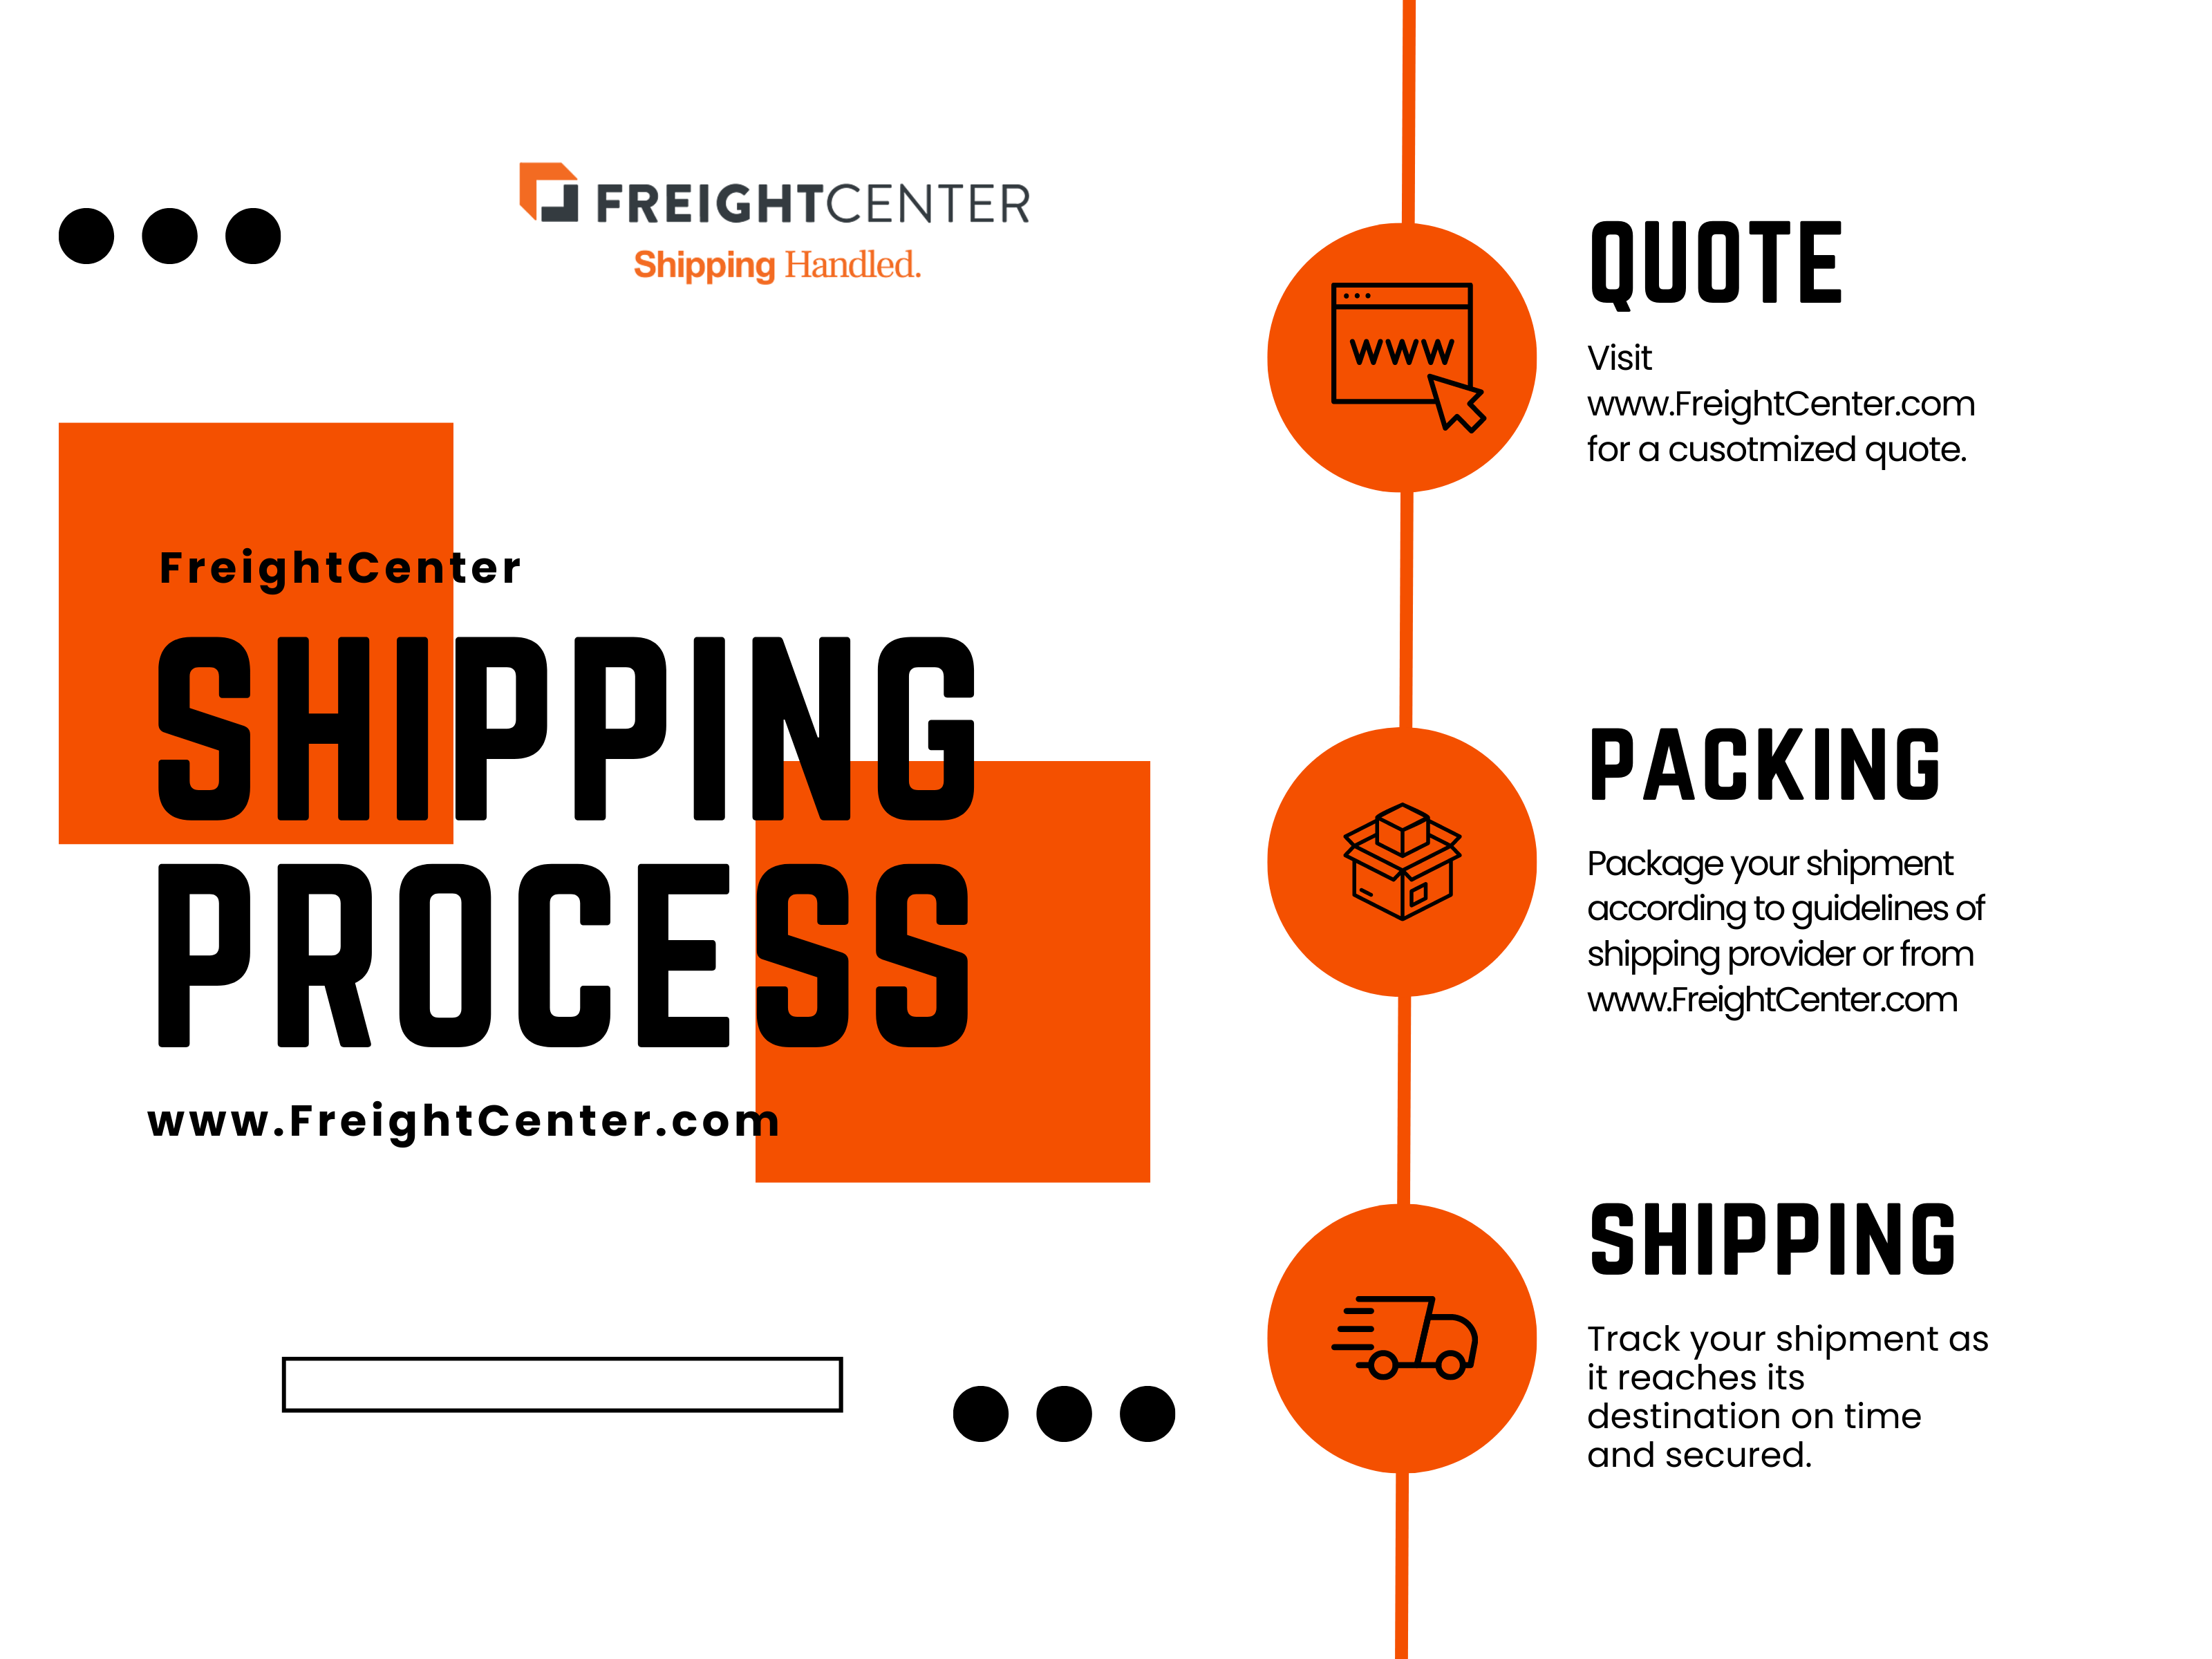 Shipping bathroom tiles shipping process infographic FreightCenter